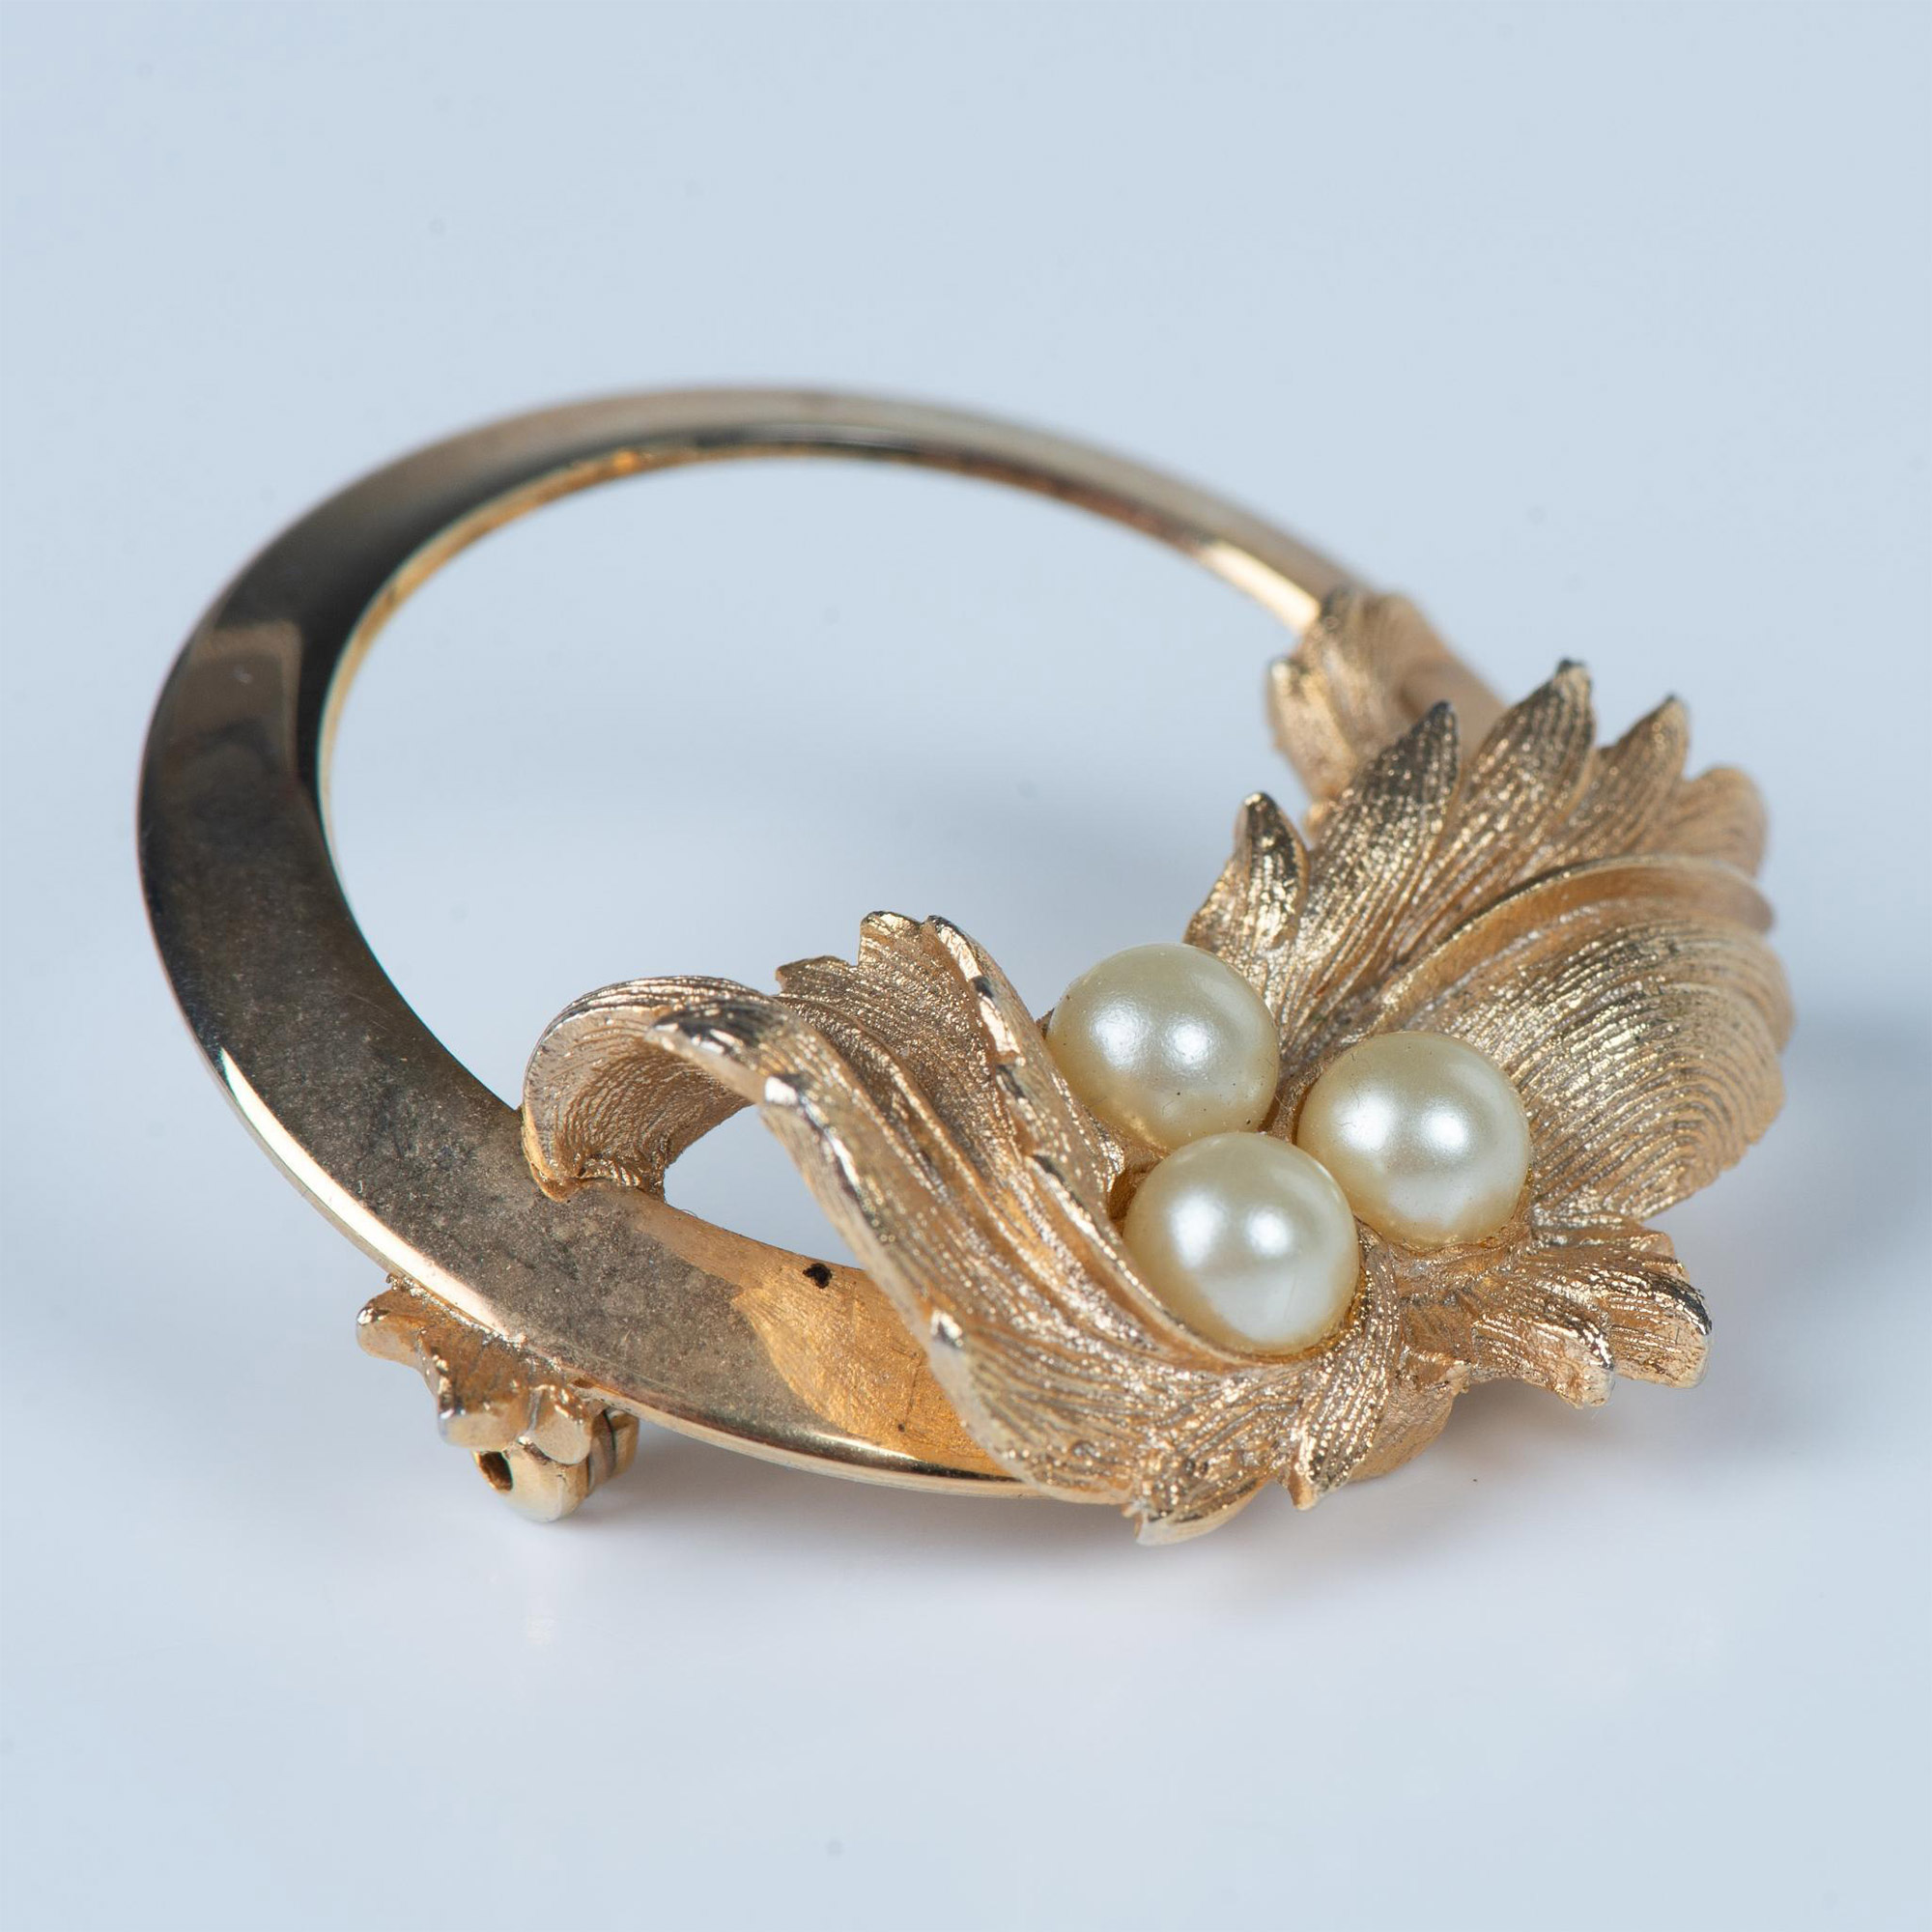 4pc Gold Tone Bracelets and Brooches - Image 5 of 7